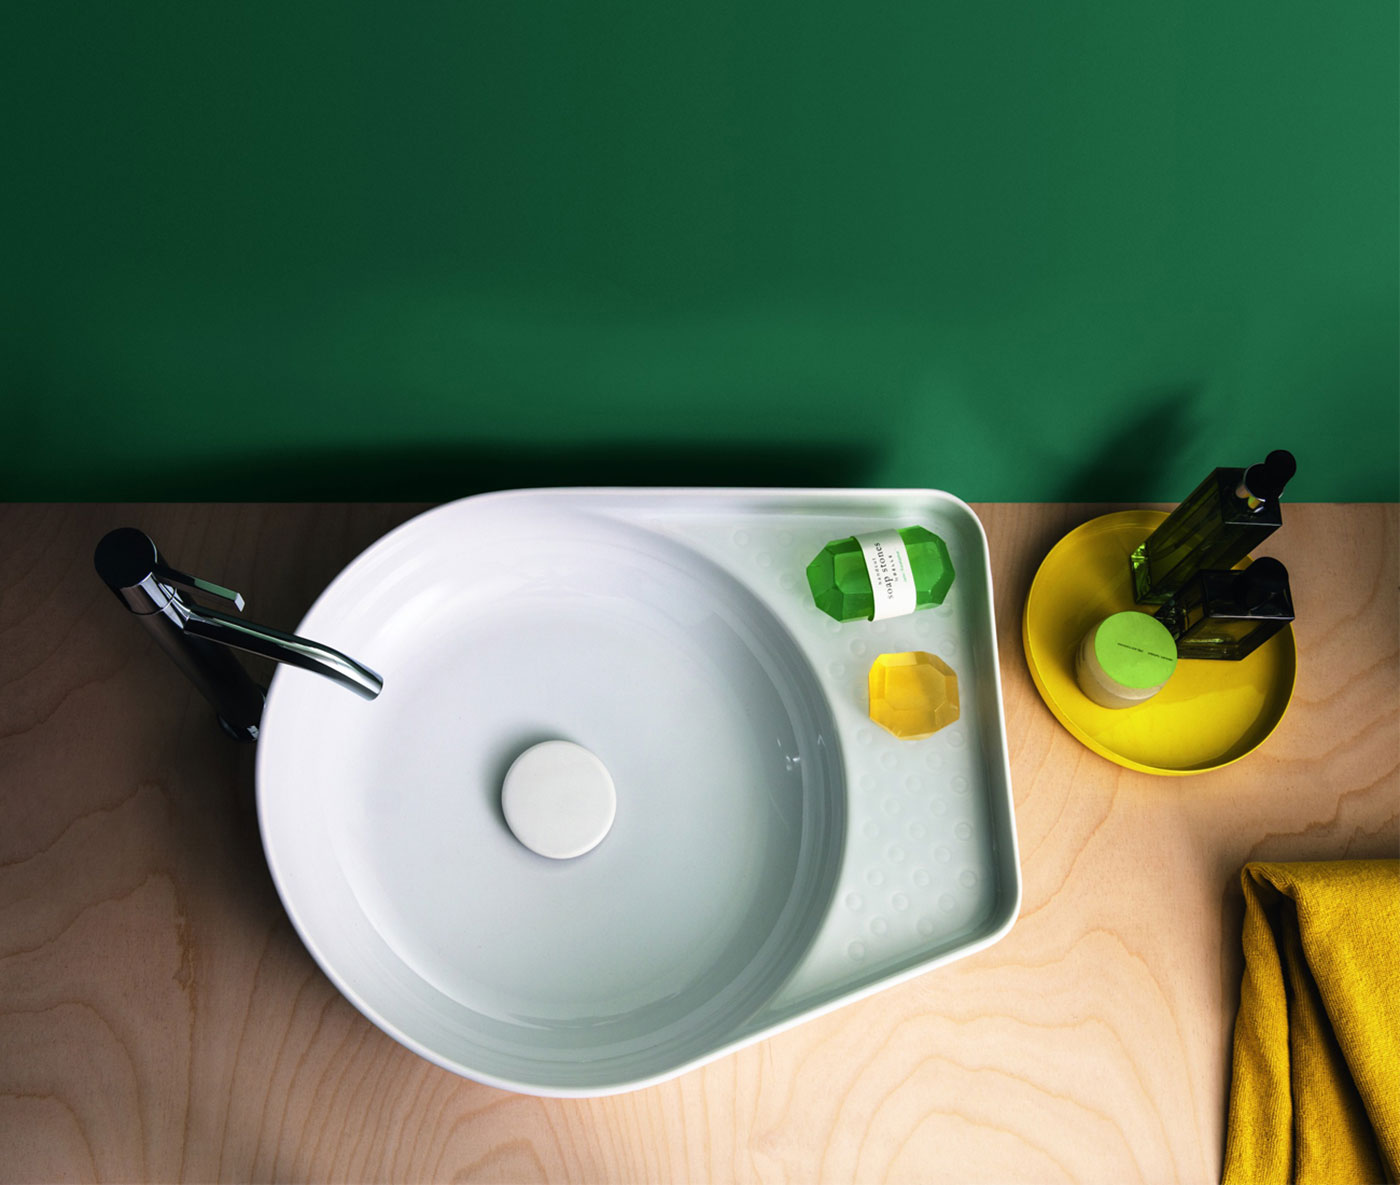 Ceramic Circular Vessel Bathroom Sink against a green background. Soaps are visible in on the counter